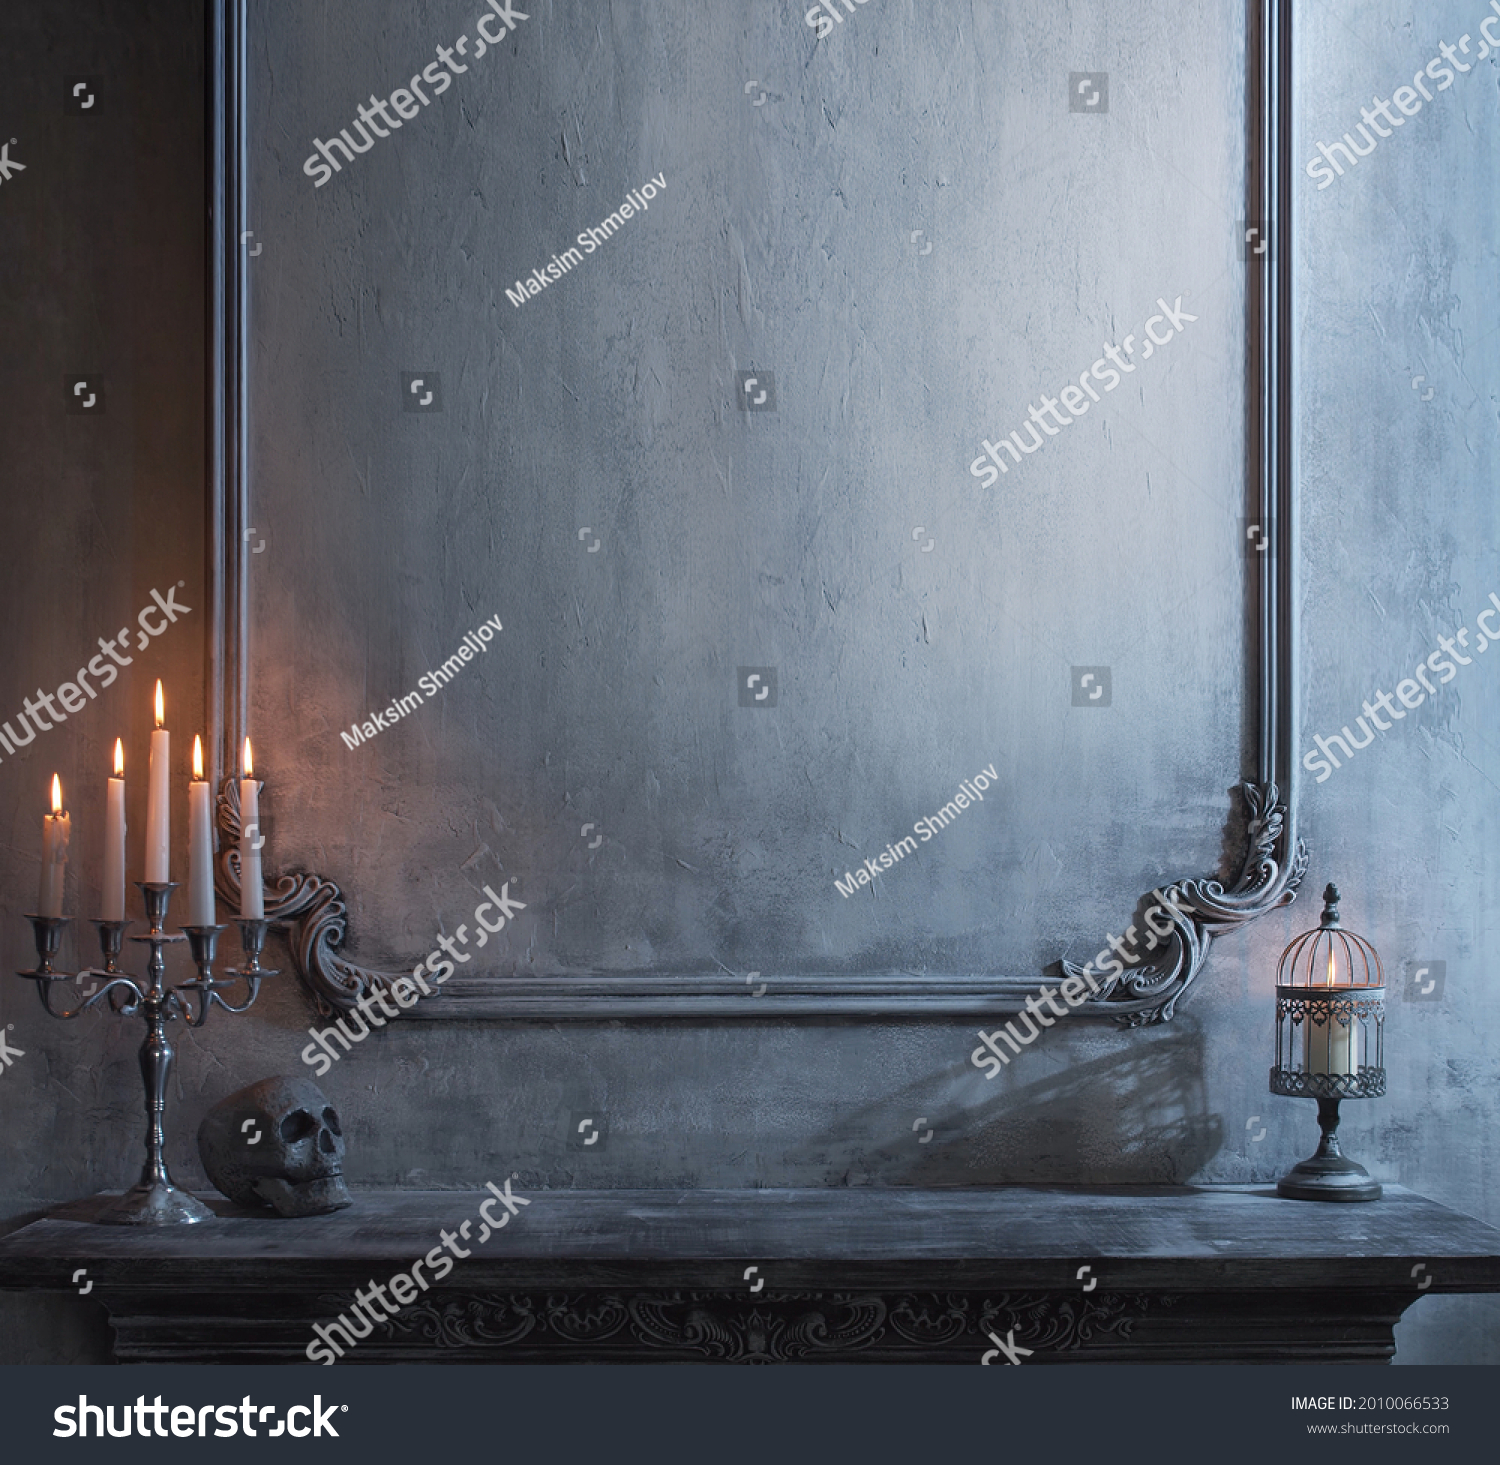 Mystical Halloween still-life background. Skull, candlestick with candles, old fireplace. Horror and witchery. #2010066533